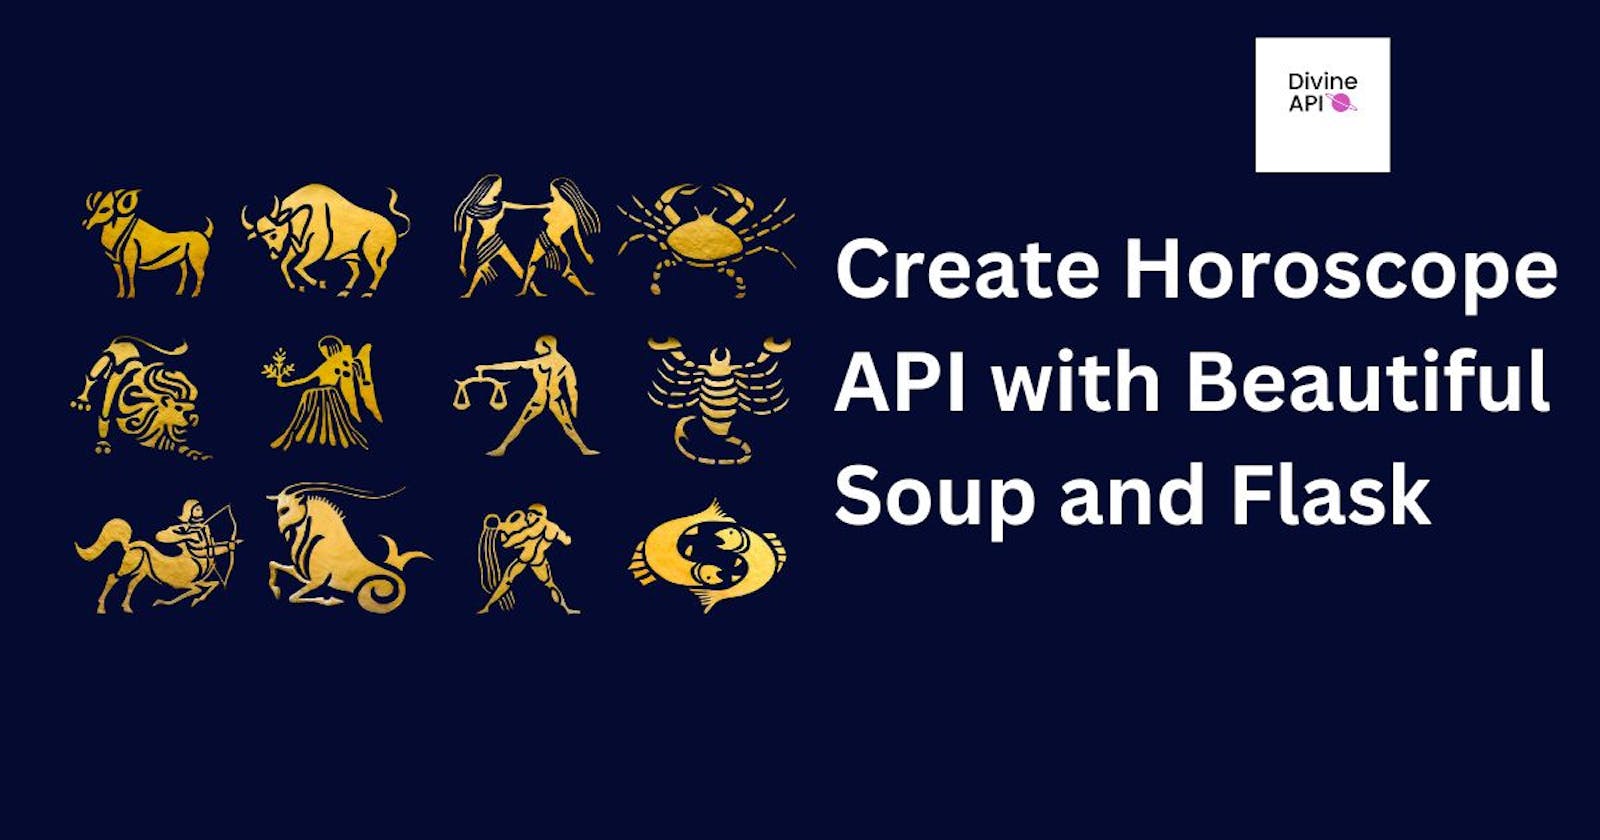 How to Create Horoscope API with Beautiful Soup and Flask